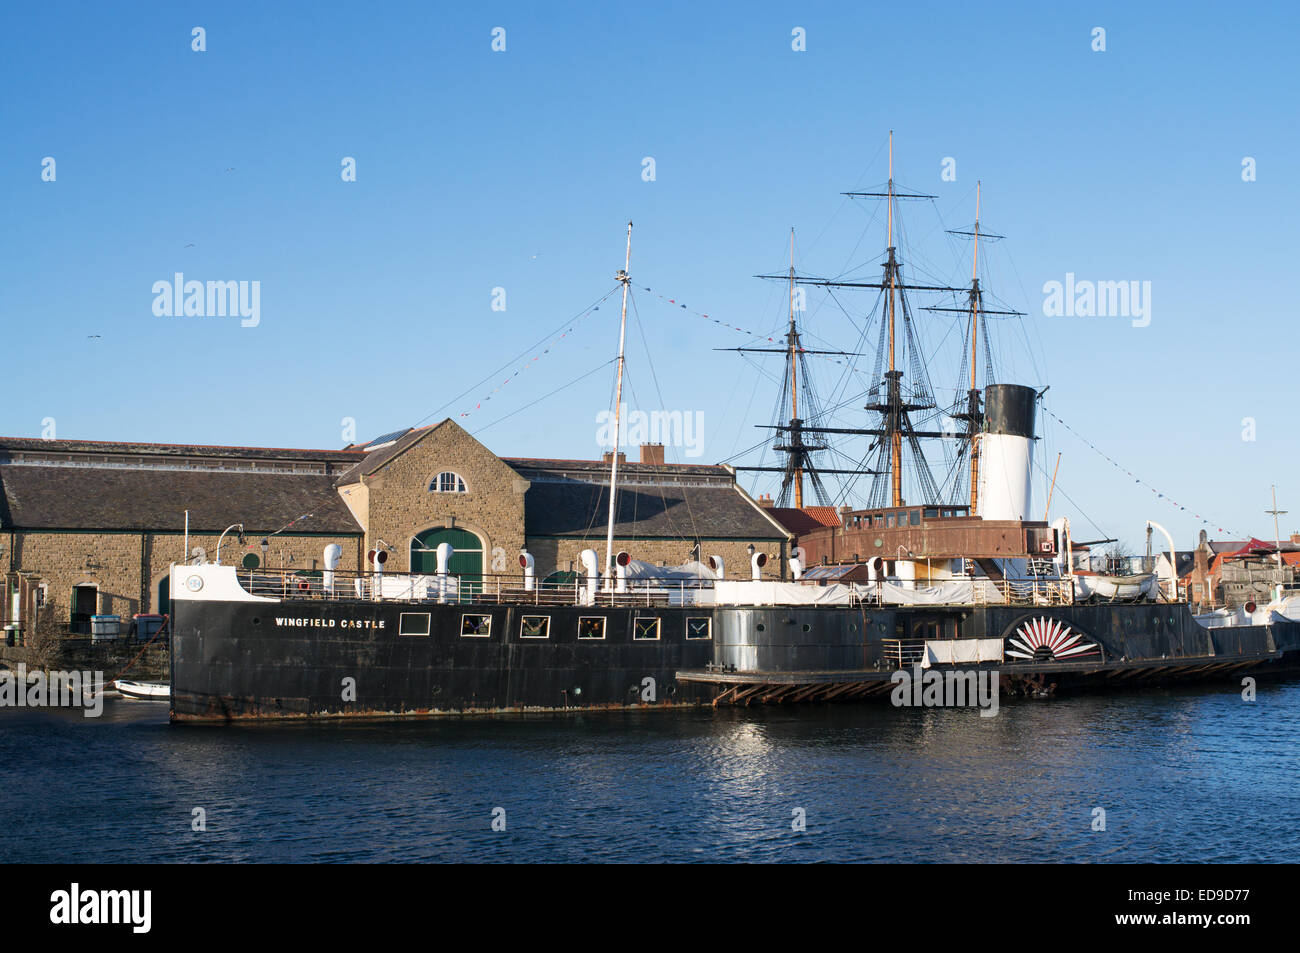 Paddle Steamer PS Wingfield Castle at Hartlepool maritime museum, north east England, UK Stock Photo